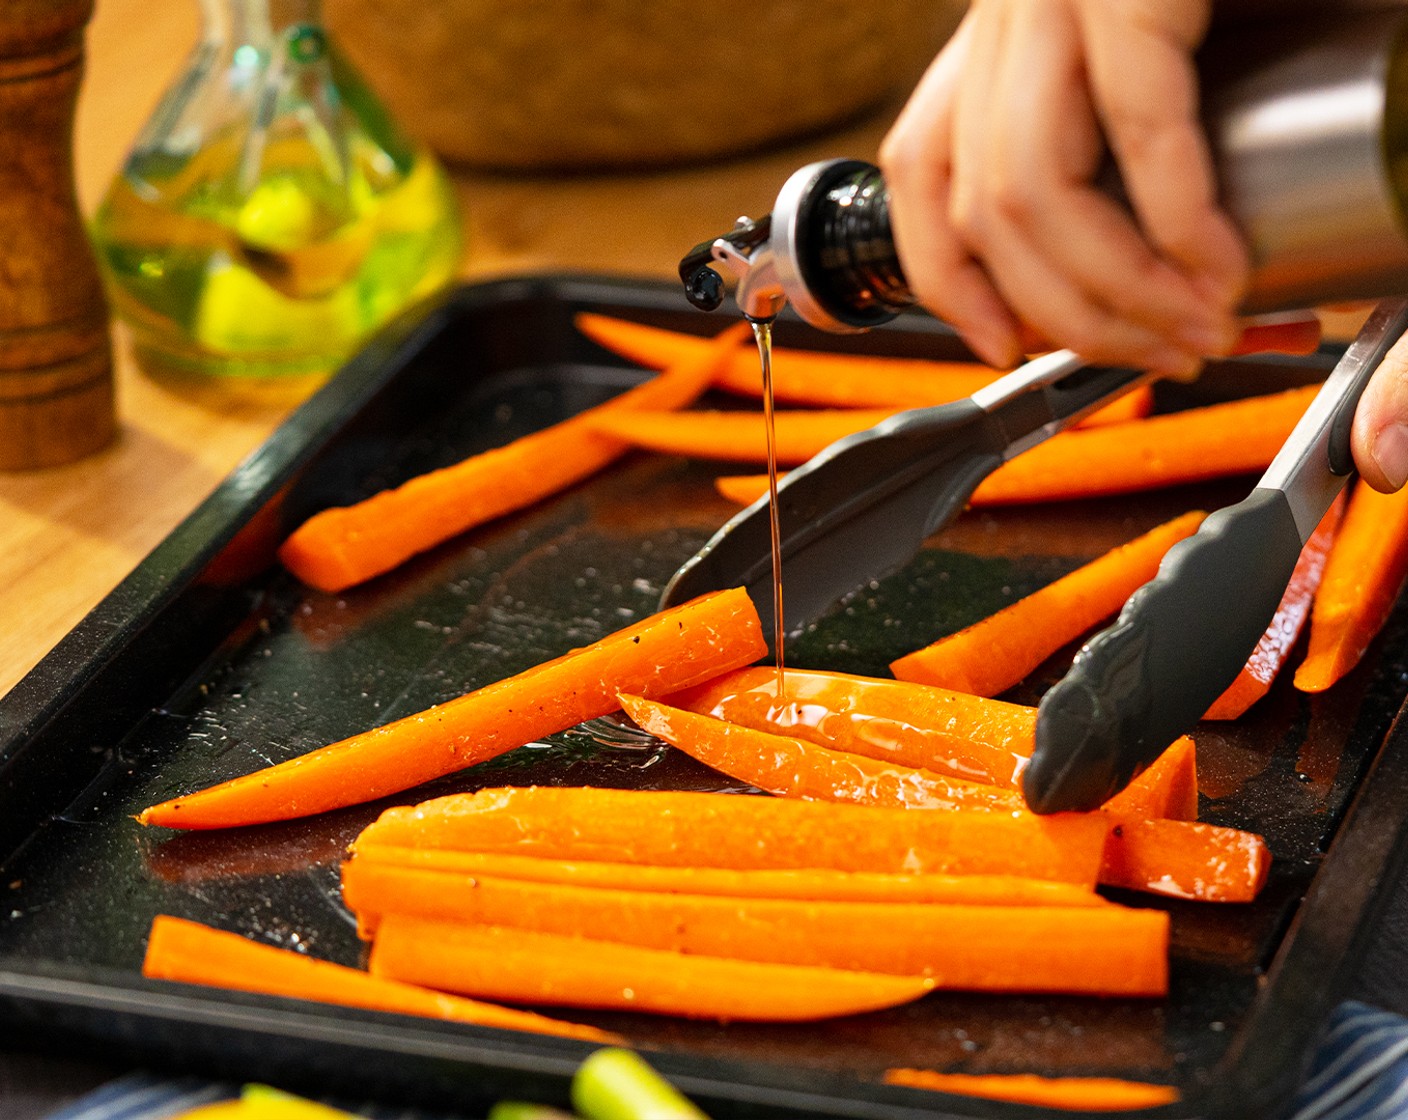 step 2 On a baking tray, toss Carrots (3 cups) with Olive Oil (2 Tbsp), Fine Salt (1/2 tsp), and Ground Black Pepper (1/2 tsp). Roast in the oven for 10-15 minutes.